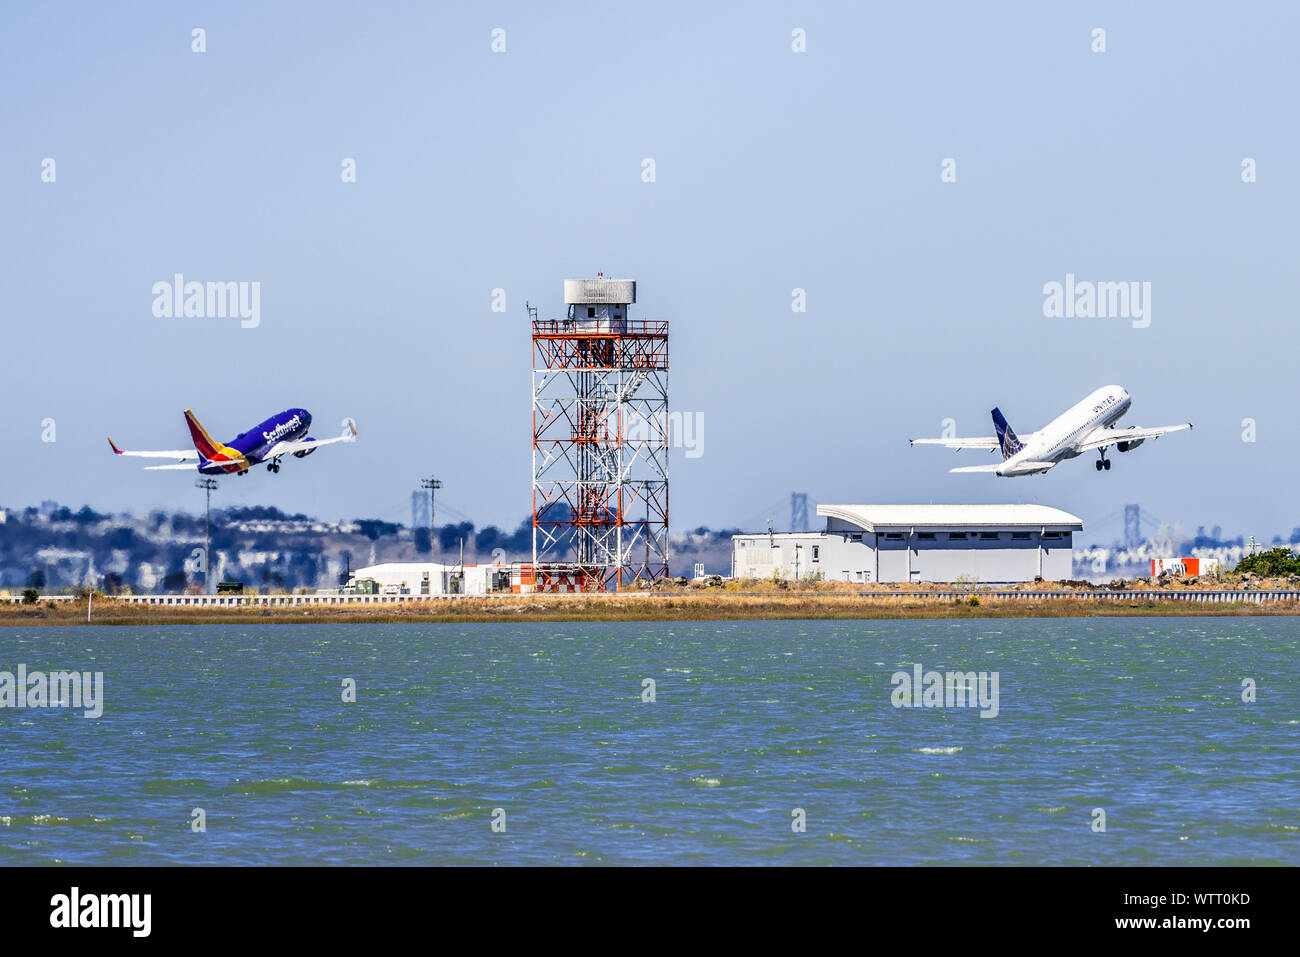 September 1, 2019 Burlingame / CA / USA - Two air crafts (Southwest Airlines and United Airlines) taking off at the same time from San Francisco Inter Stock Photo